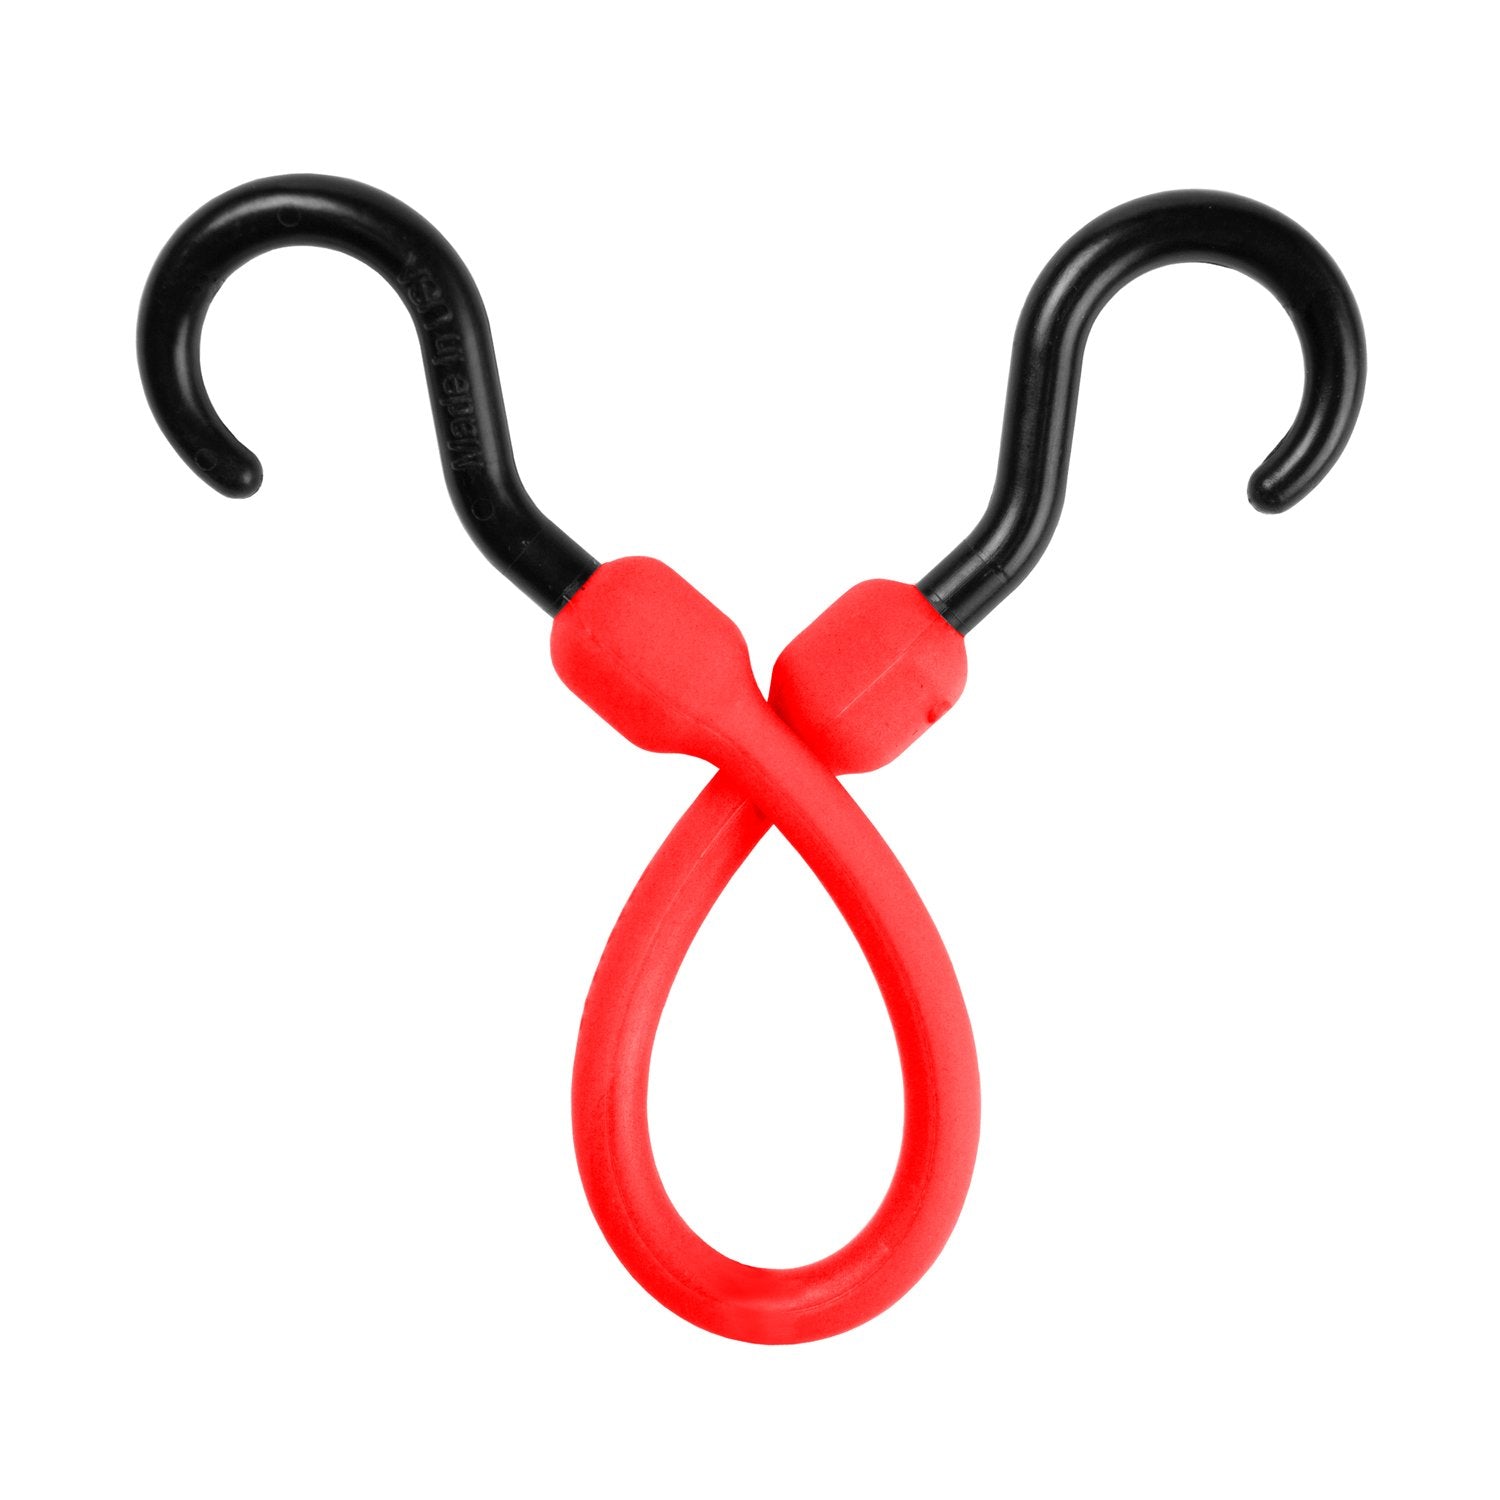 12" Easy Stretch Bungee Cord - Wholesale - The Perfect Bungee & ShockStrap Tie Downs